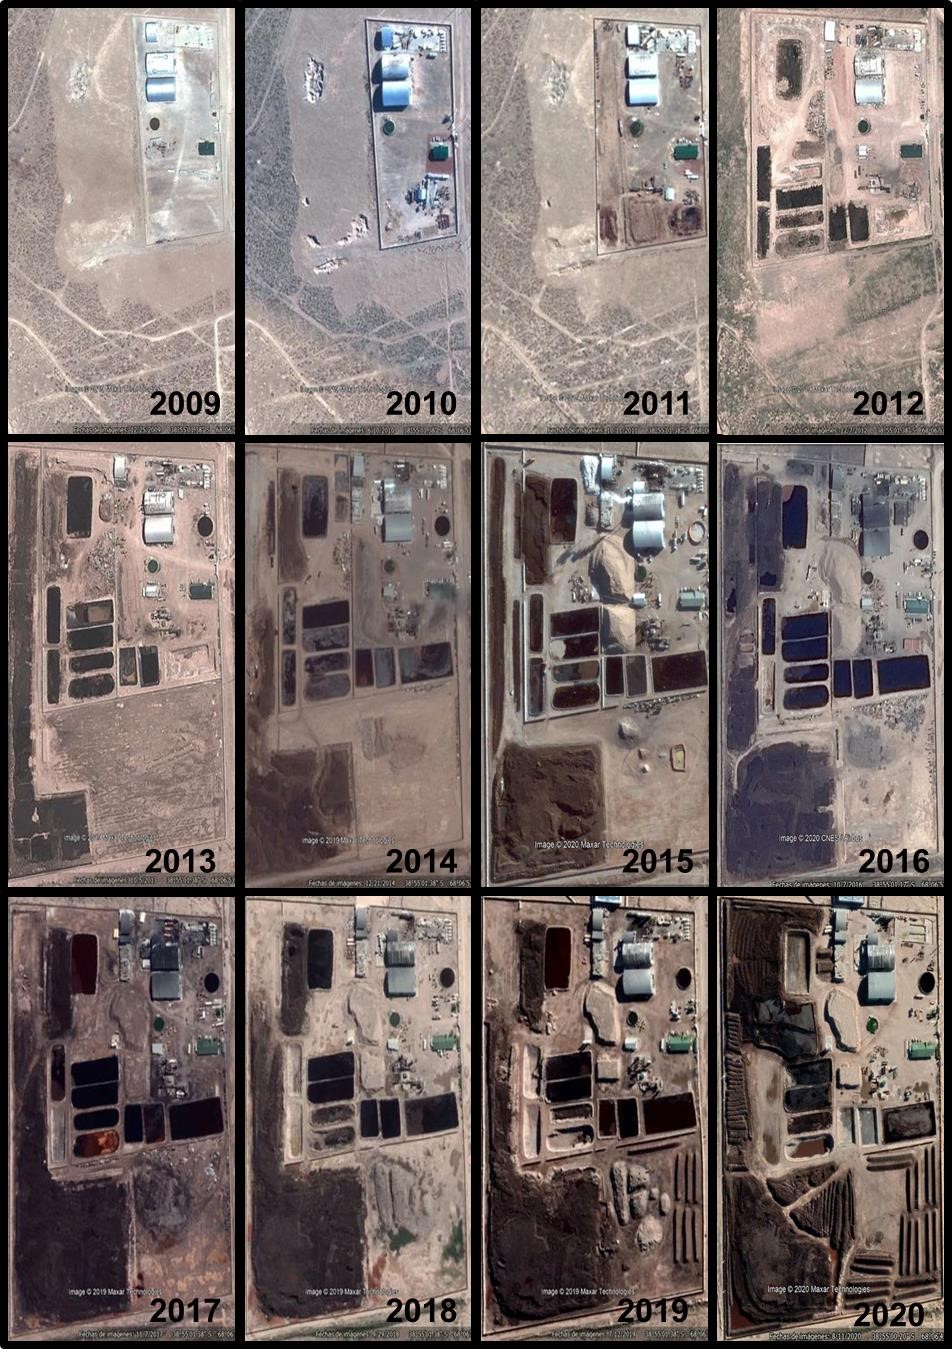 Satellite images of a Comarsa oil and gas waste processing facility expanding between 2009 and 2020.